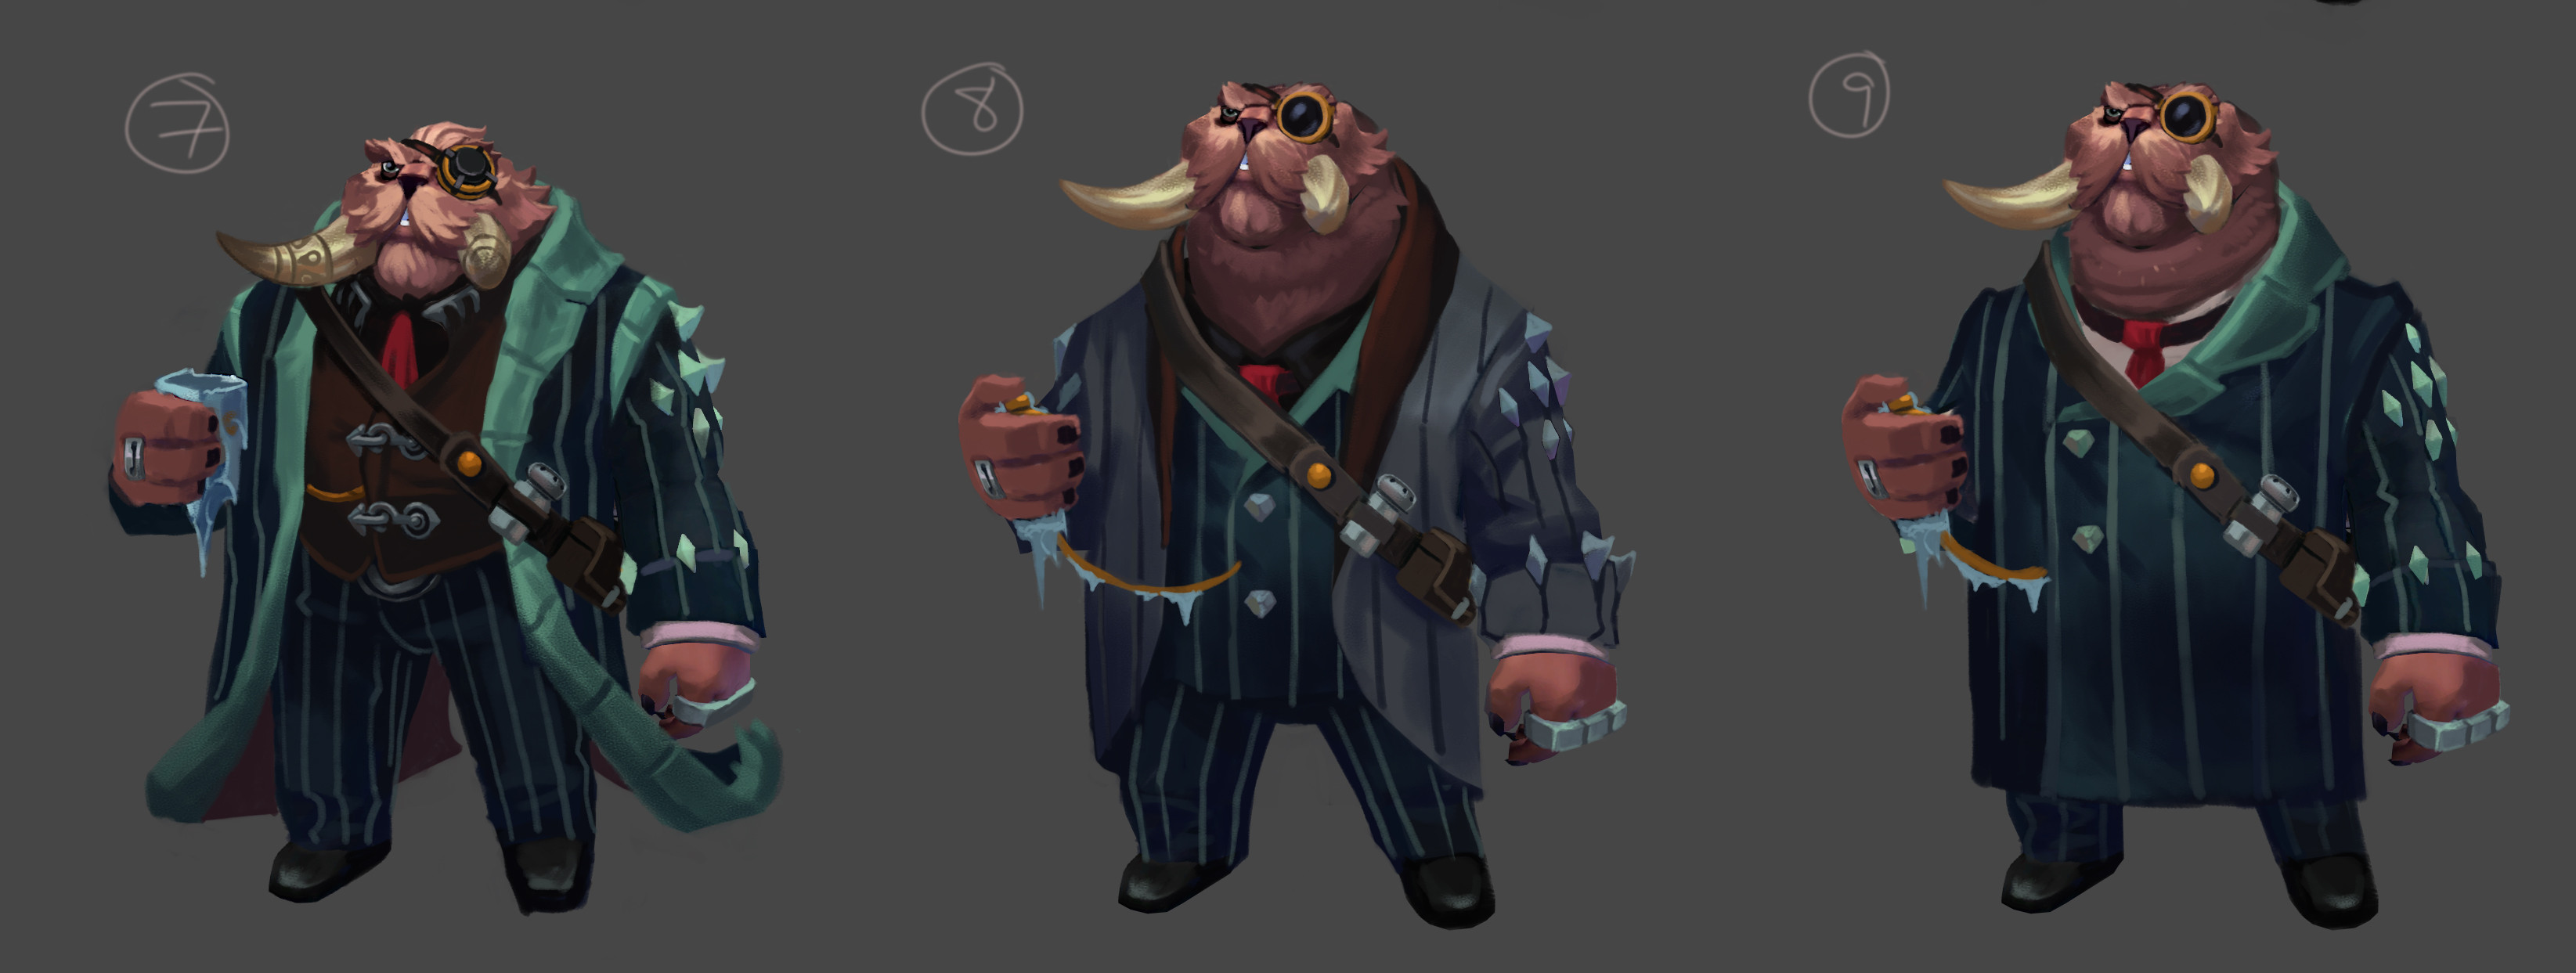 Concepting some Jull visual development Exploration - revamping his look,  clarify his clothing with his lore.  Grizzly Bear/Walrus mob boss with a nautical background is what I got to start with.